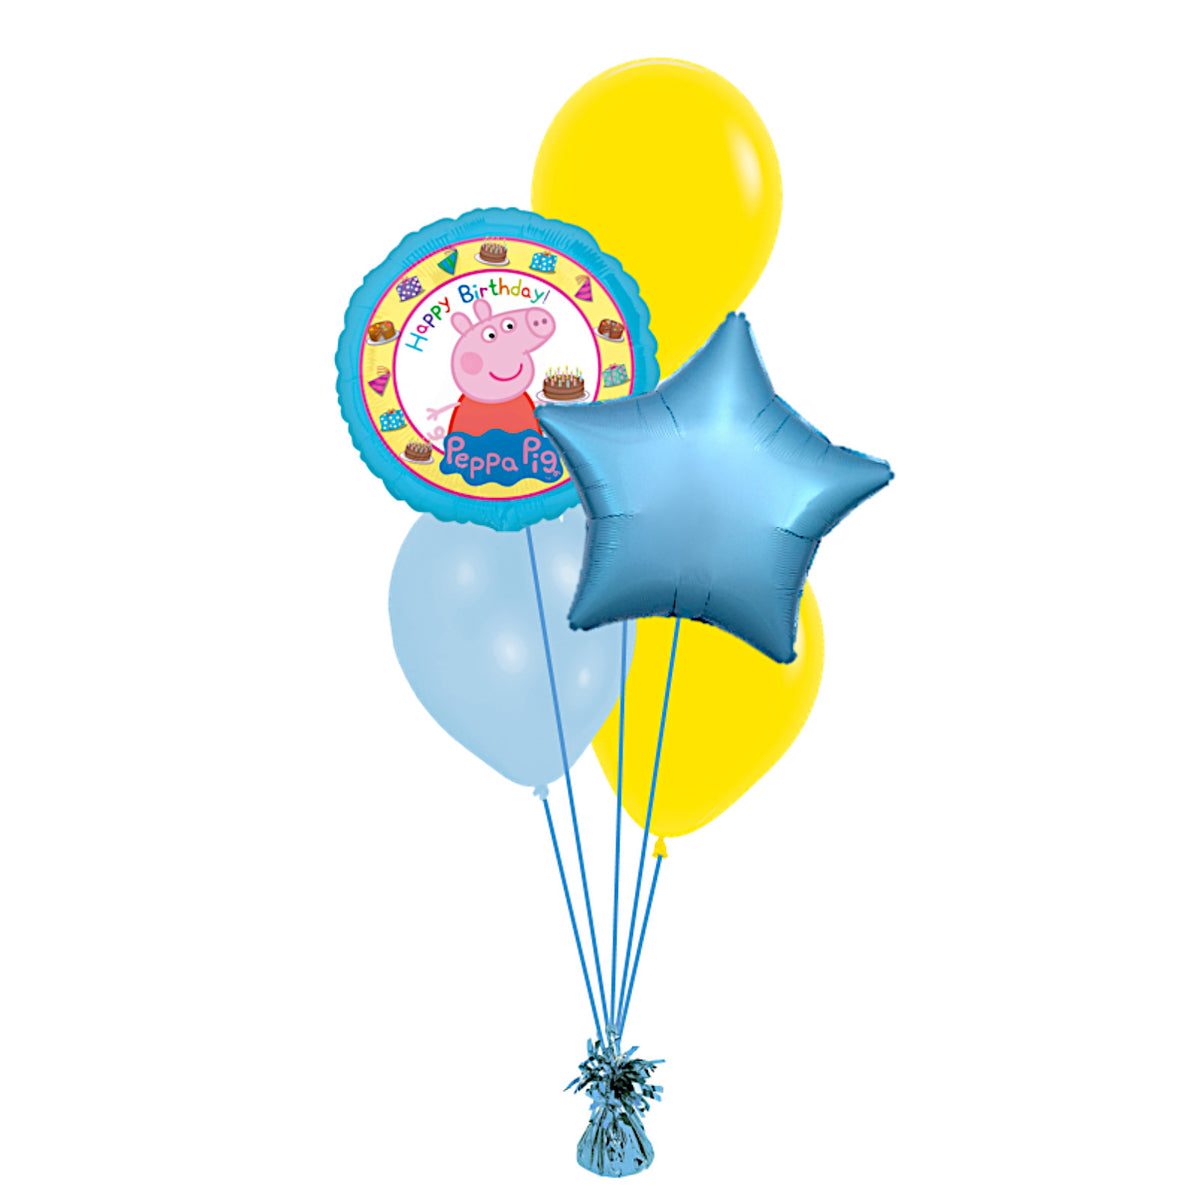 Peppa Balloons Birthday Party Helium or Air Decorations 12 Latex